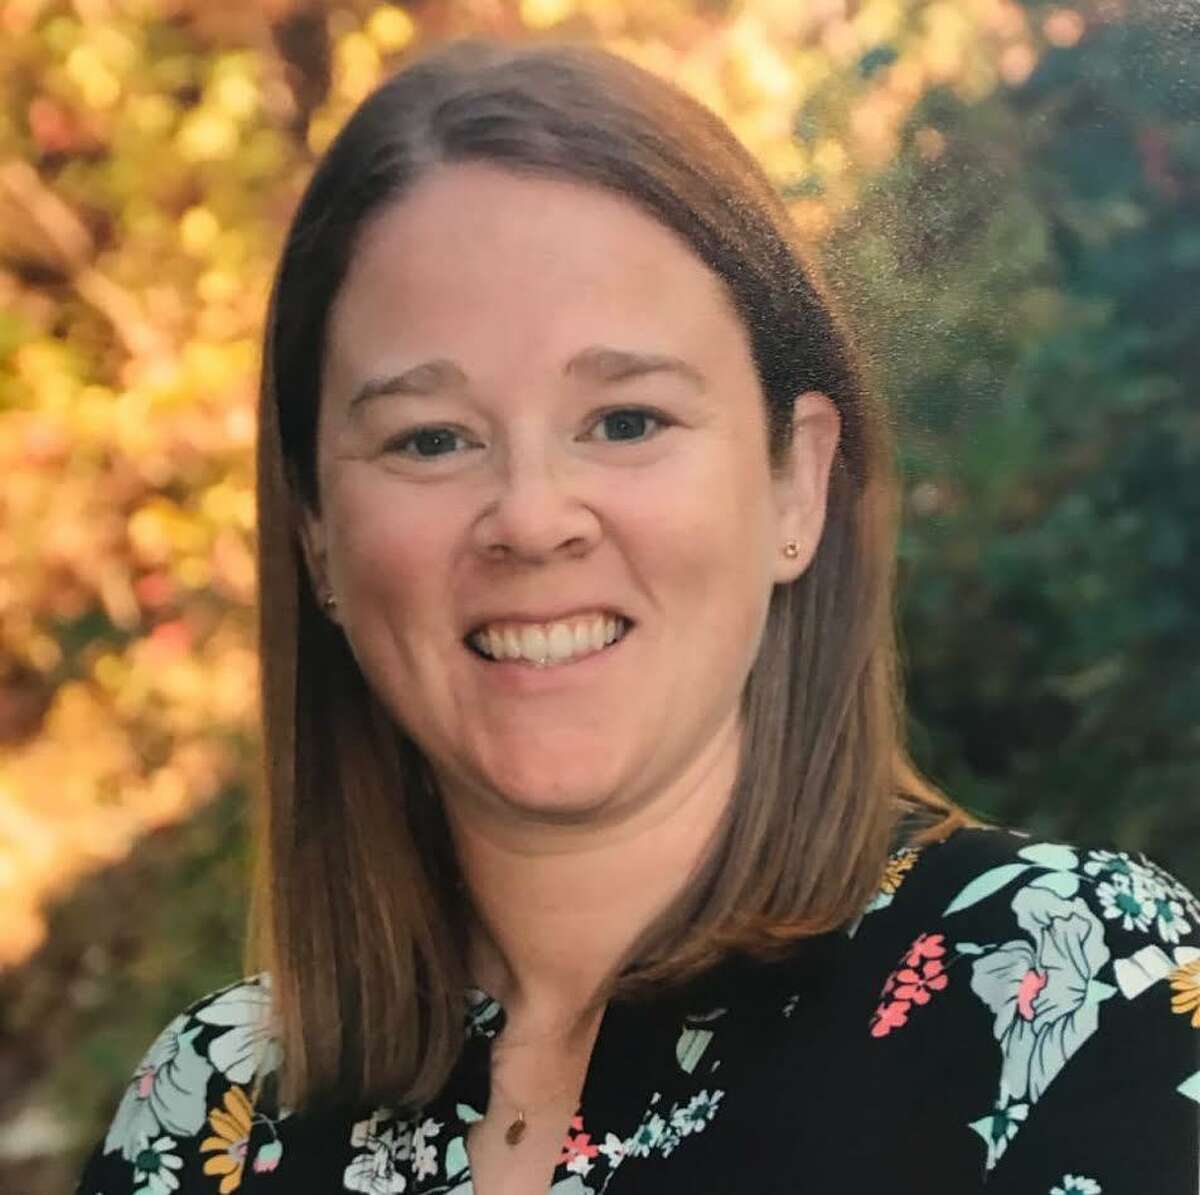 Central Middle School math teacher Caitlin Keane will fill the open assistant principal position at Old Greenwich School starting Aug. 20.